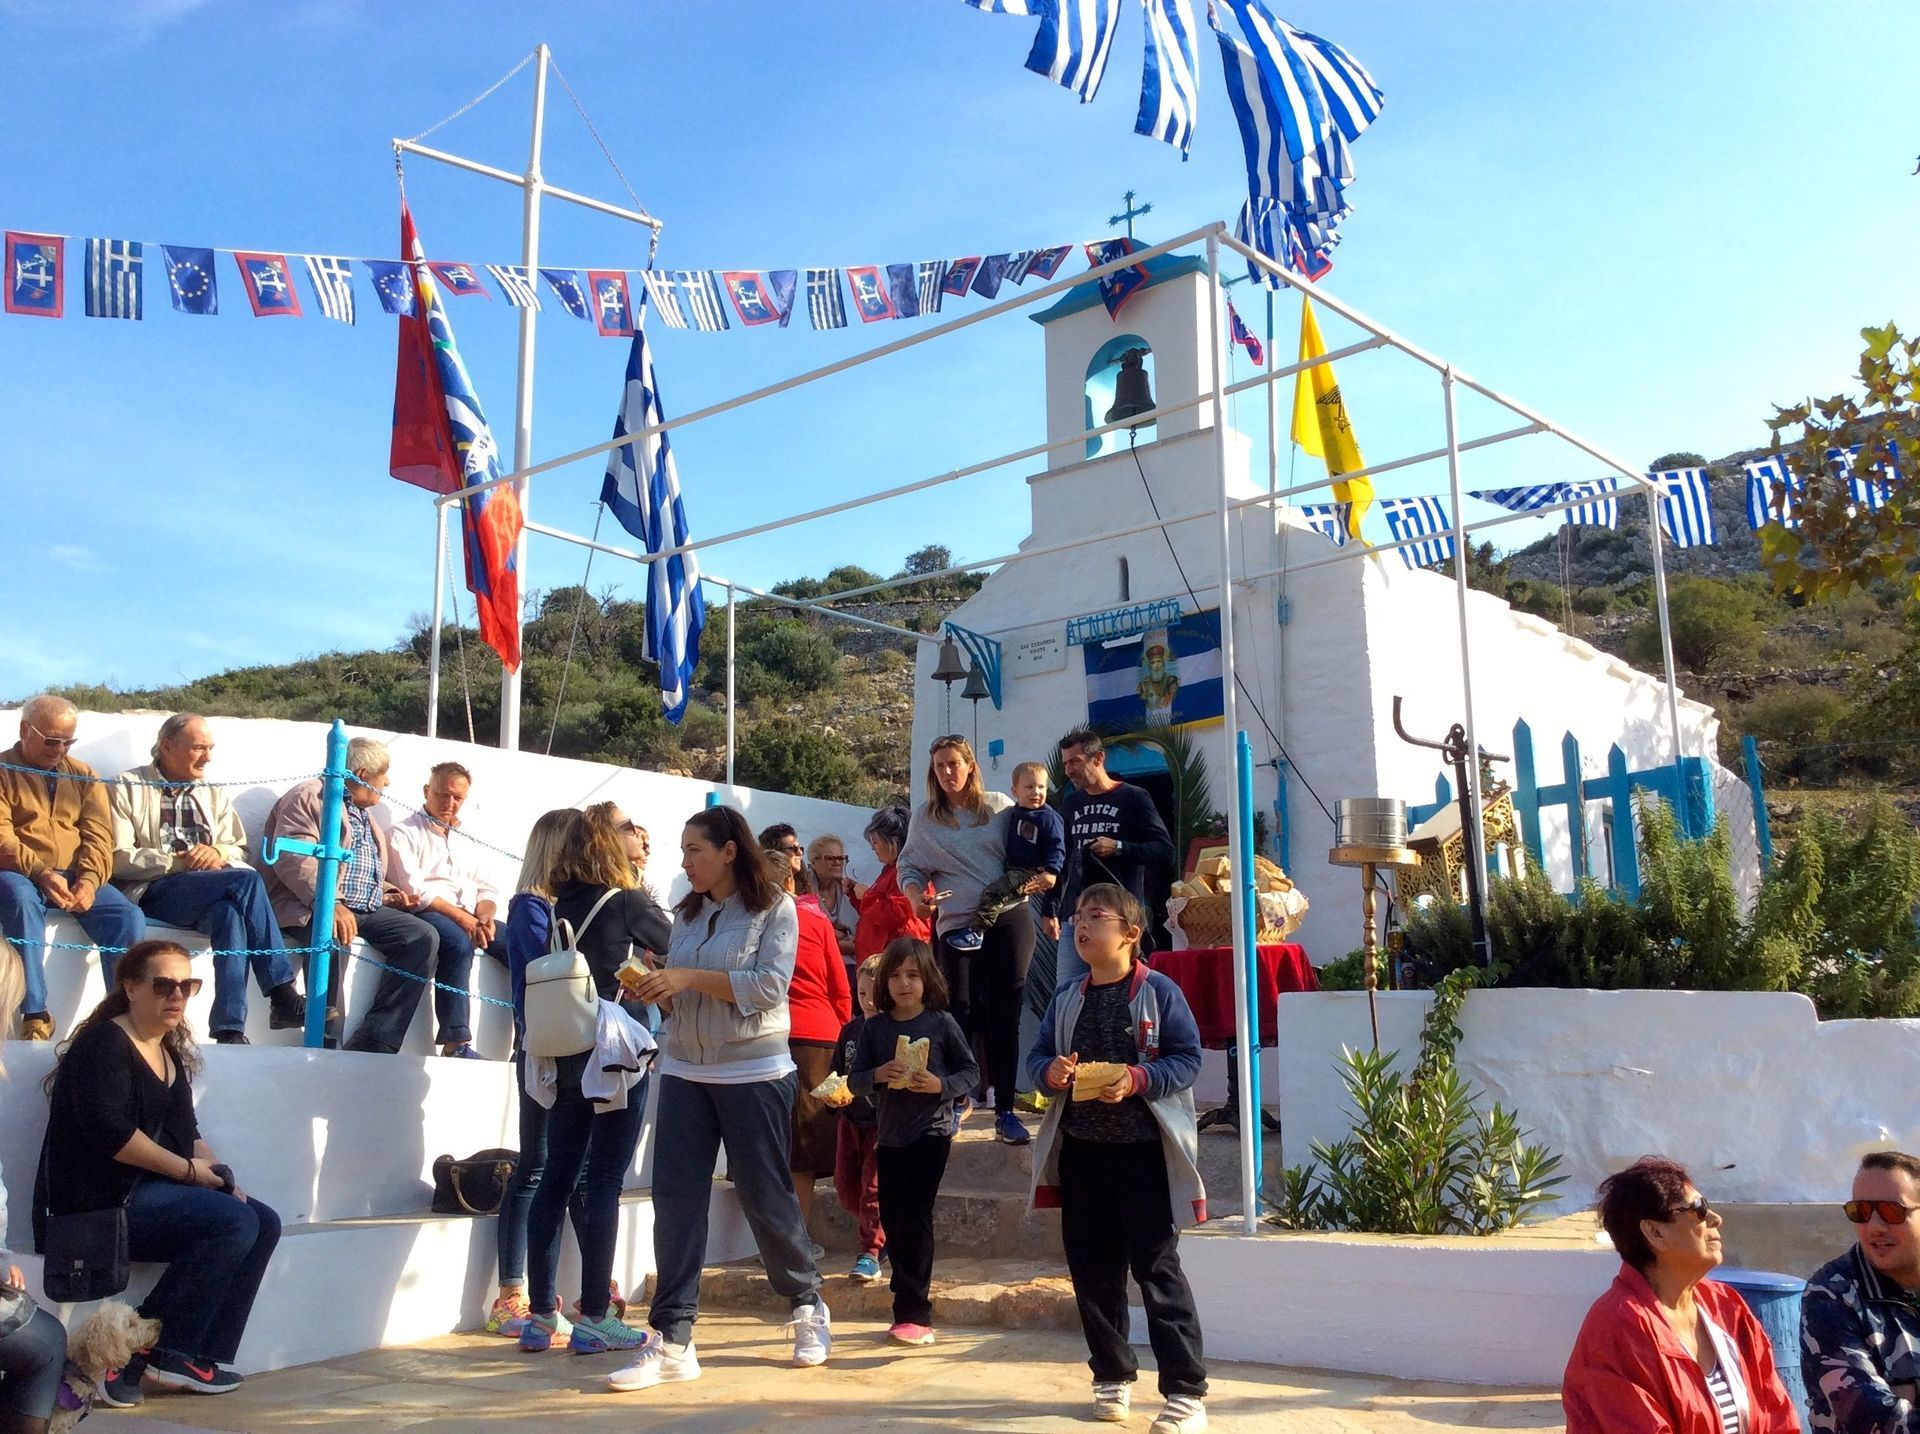 Sunday Mass in Pevges on Hydra Island, Greece, at Saint Nicolaos Chapel, 10th October 2018.